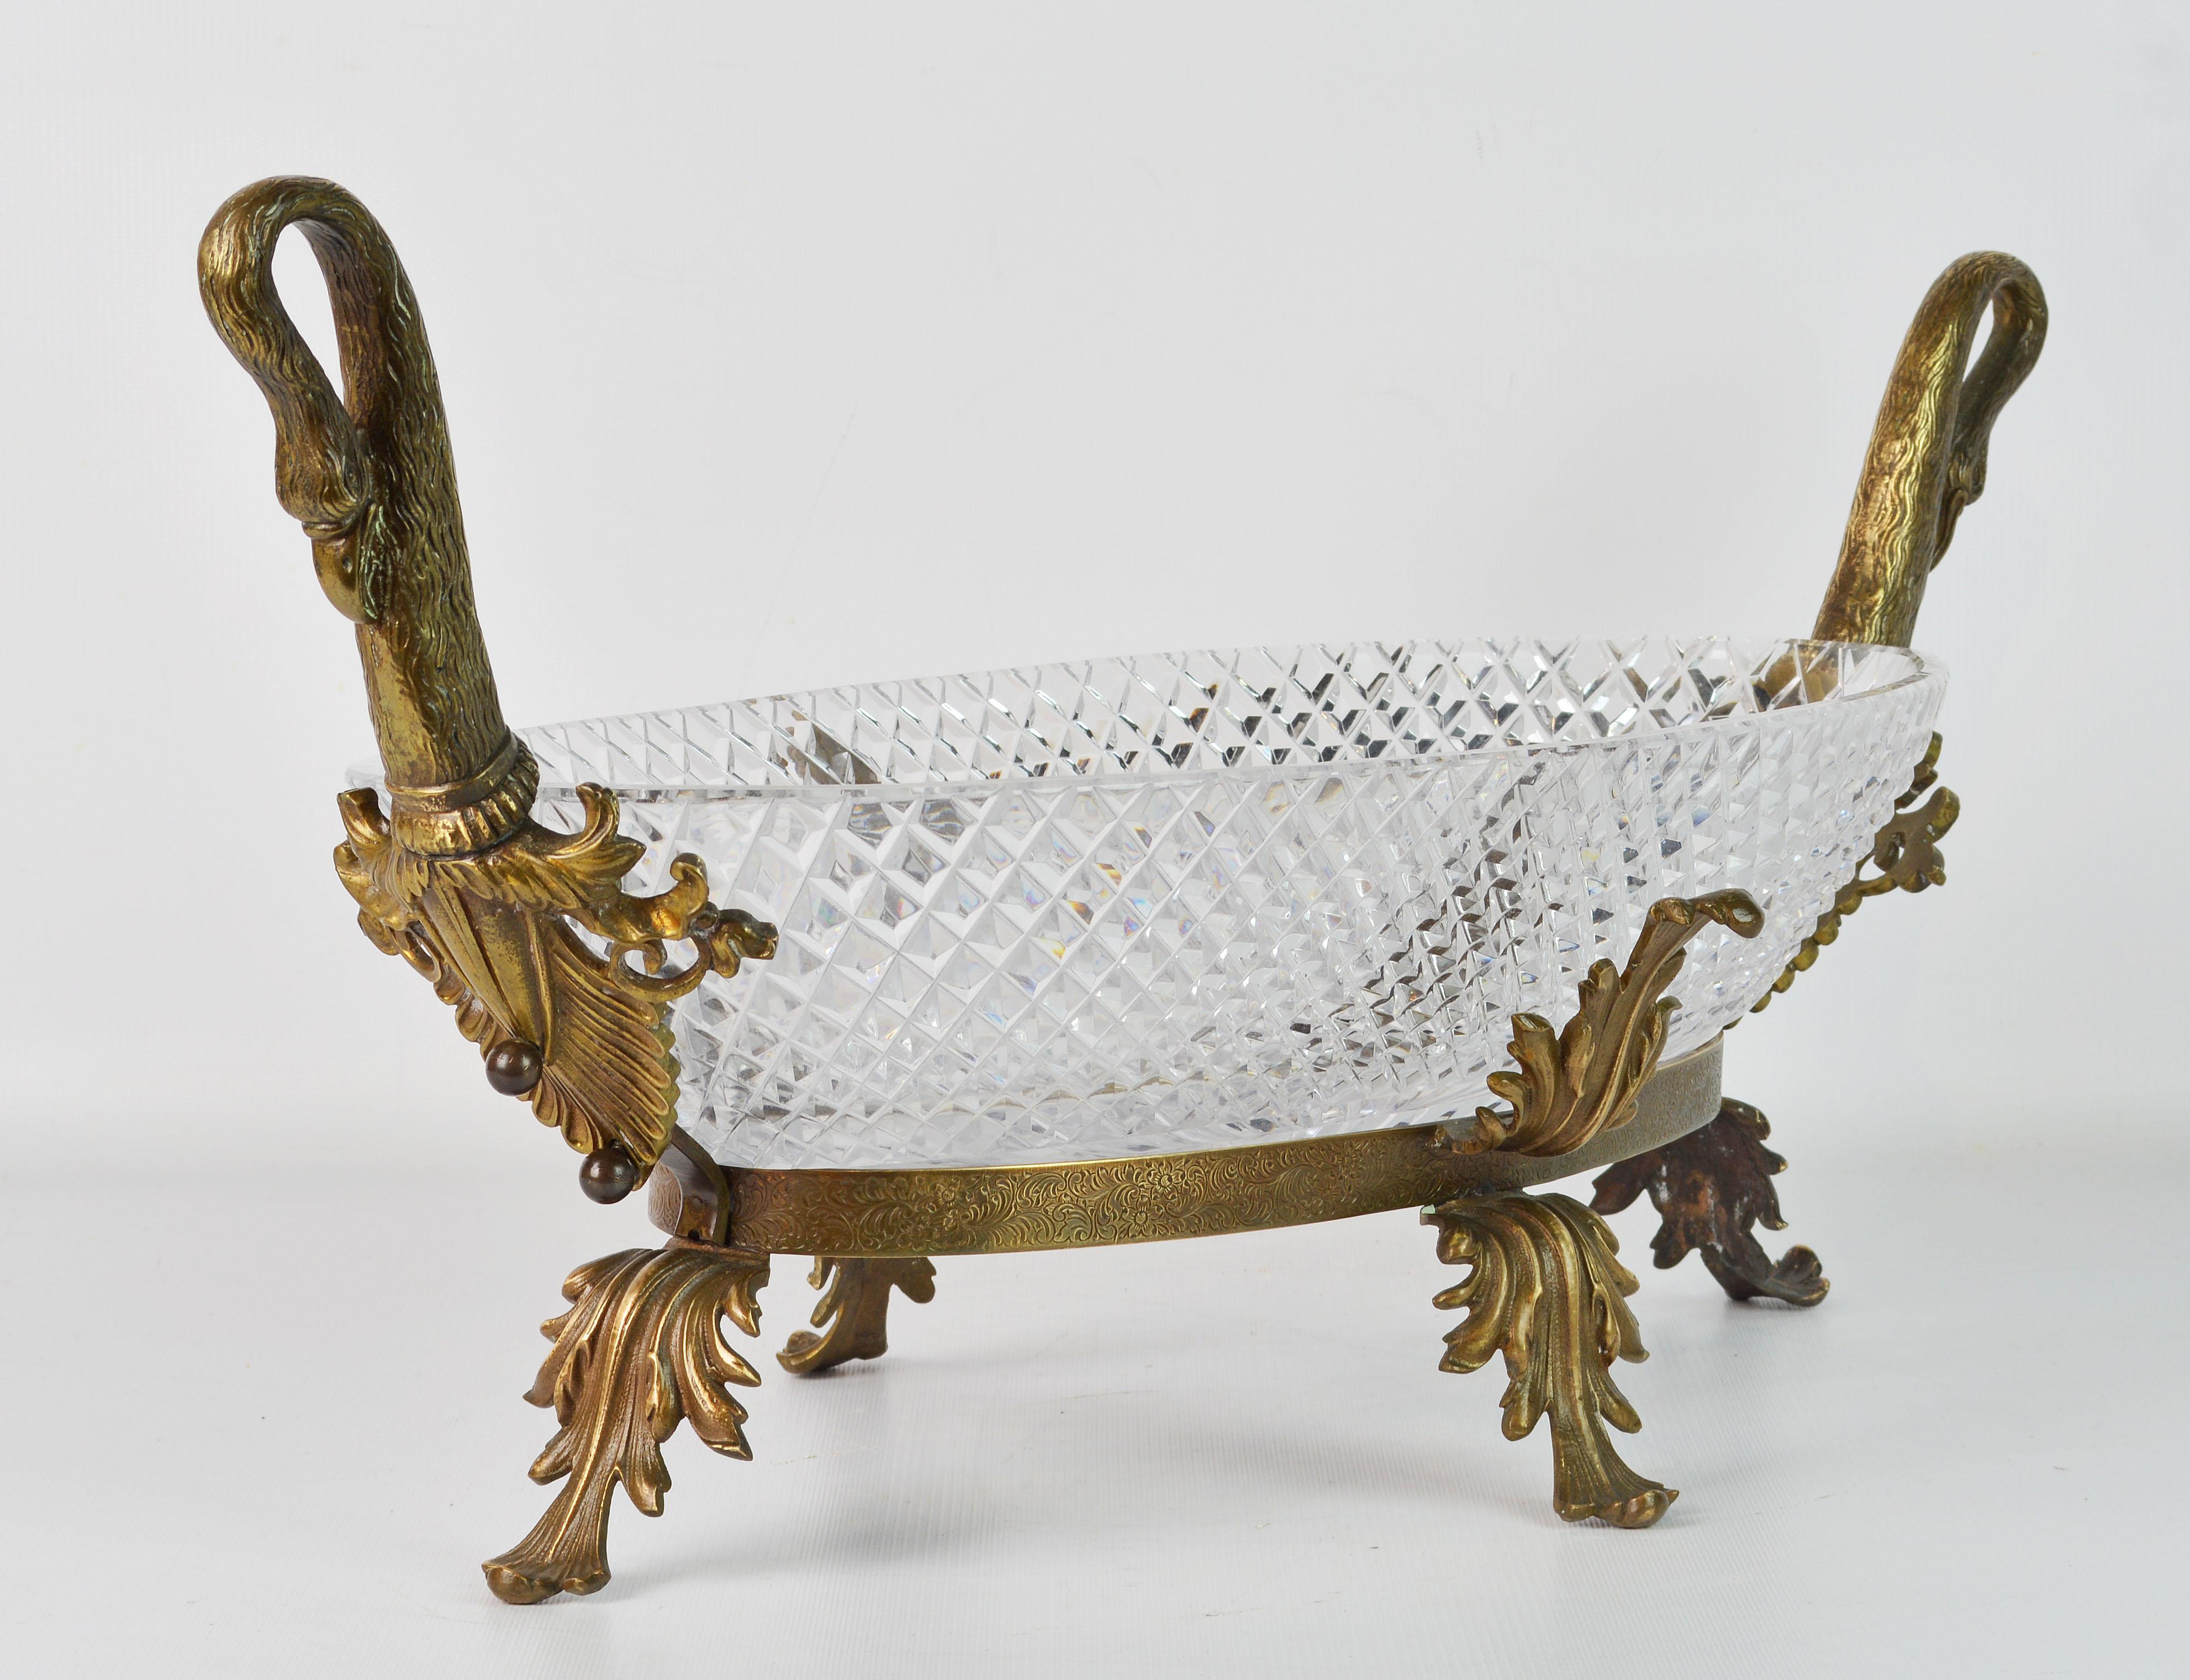 This is a rather unique center piece with a stand of leaf-work gilt bronze crested by two elegantly curved handles in the shape of flamingo necks and heads in the Empire tradition. Every detail is well crafted and the oval diamond cut crystal bowl